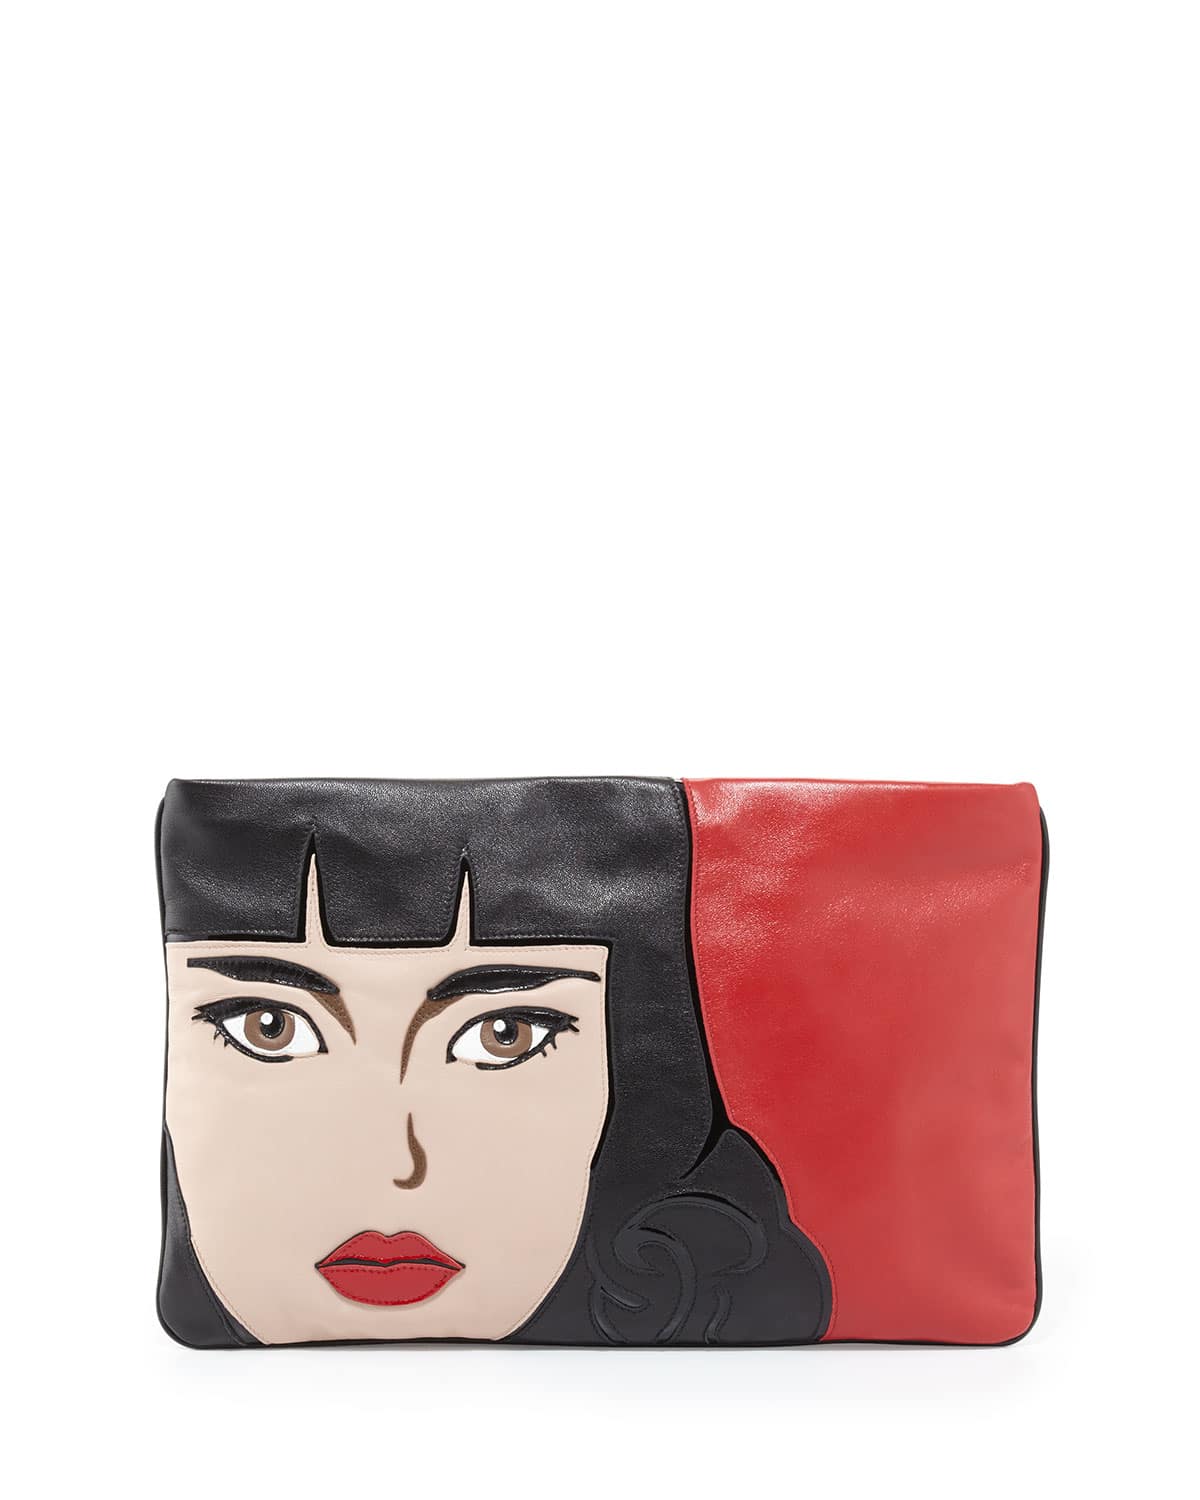 Prada Pre-Fall 2014 Bag Collection featuring new Double Totes in ...  